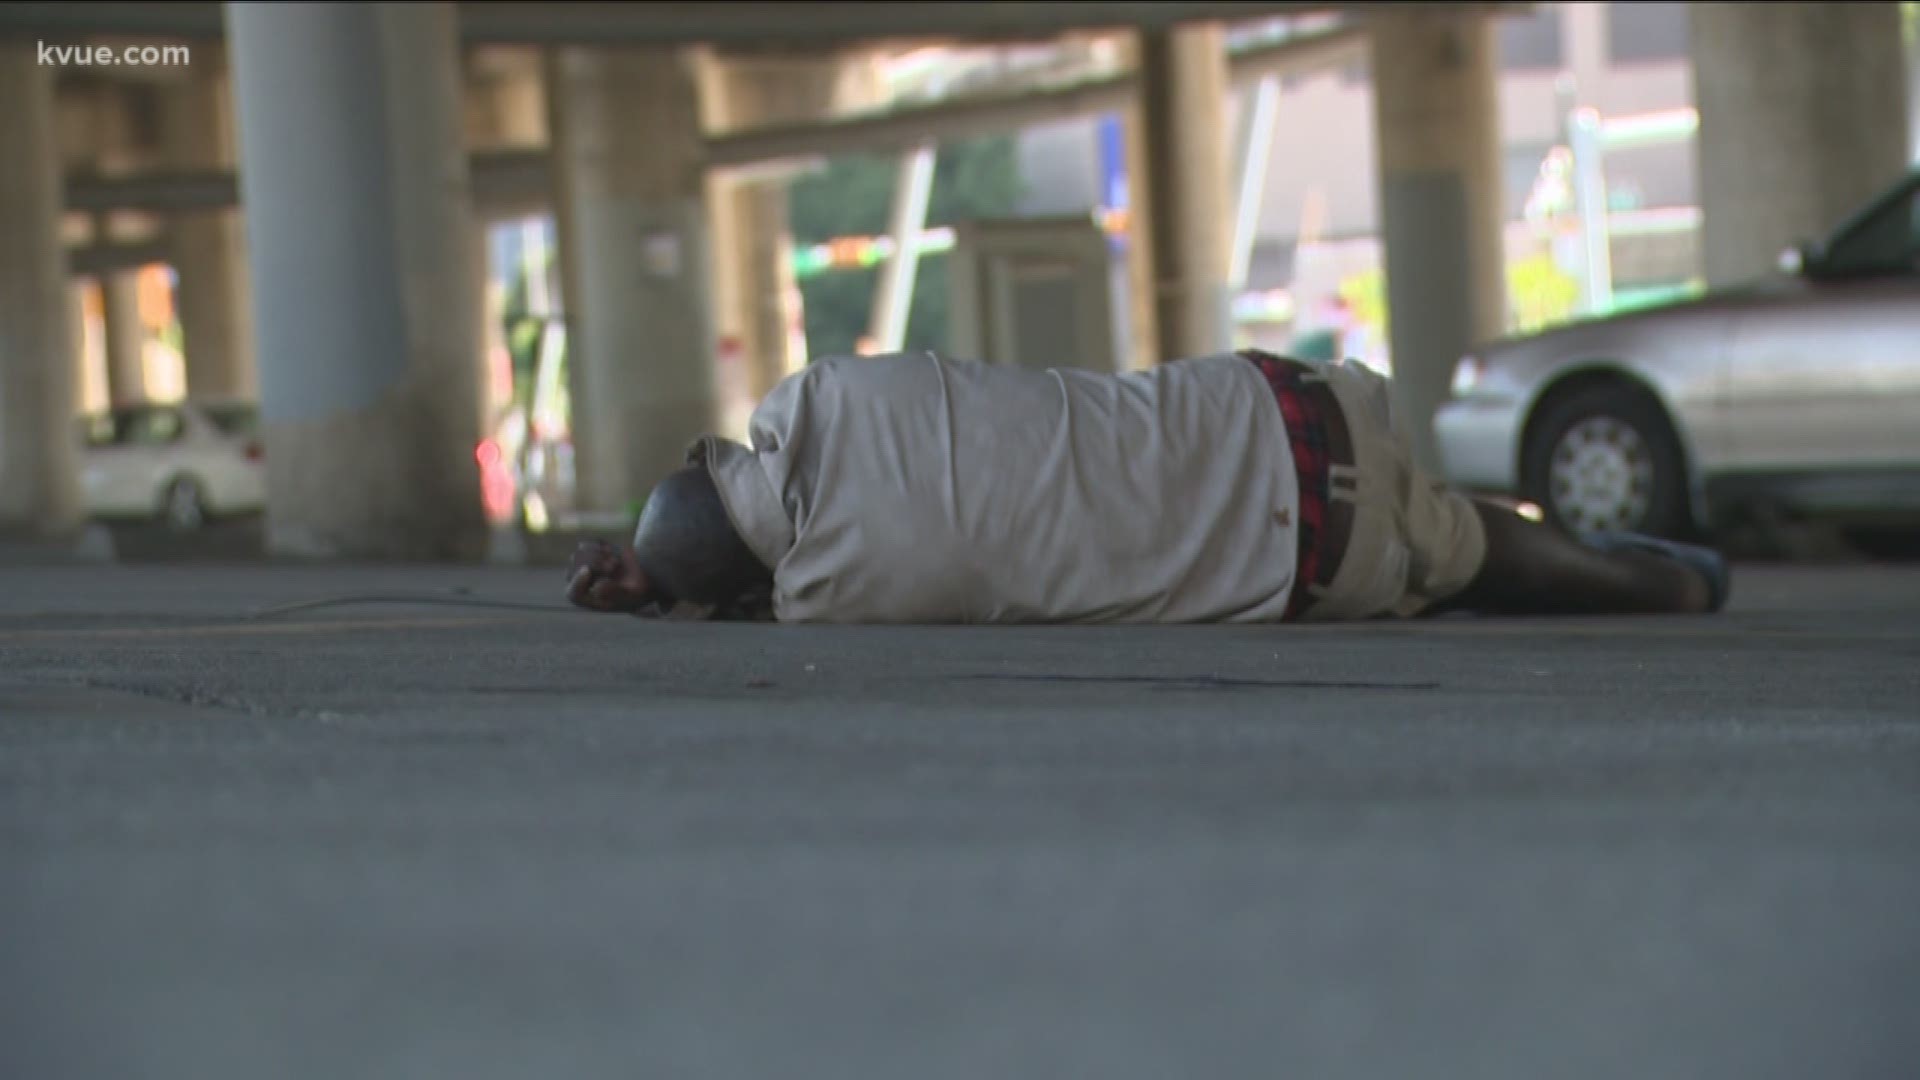 There are at least 3,000 people who want Austin to pull back on those ordinances that go easier on homeless people.